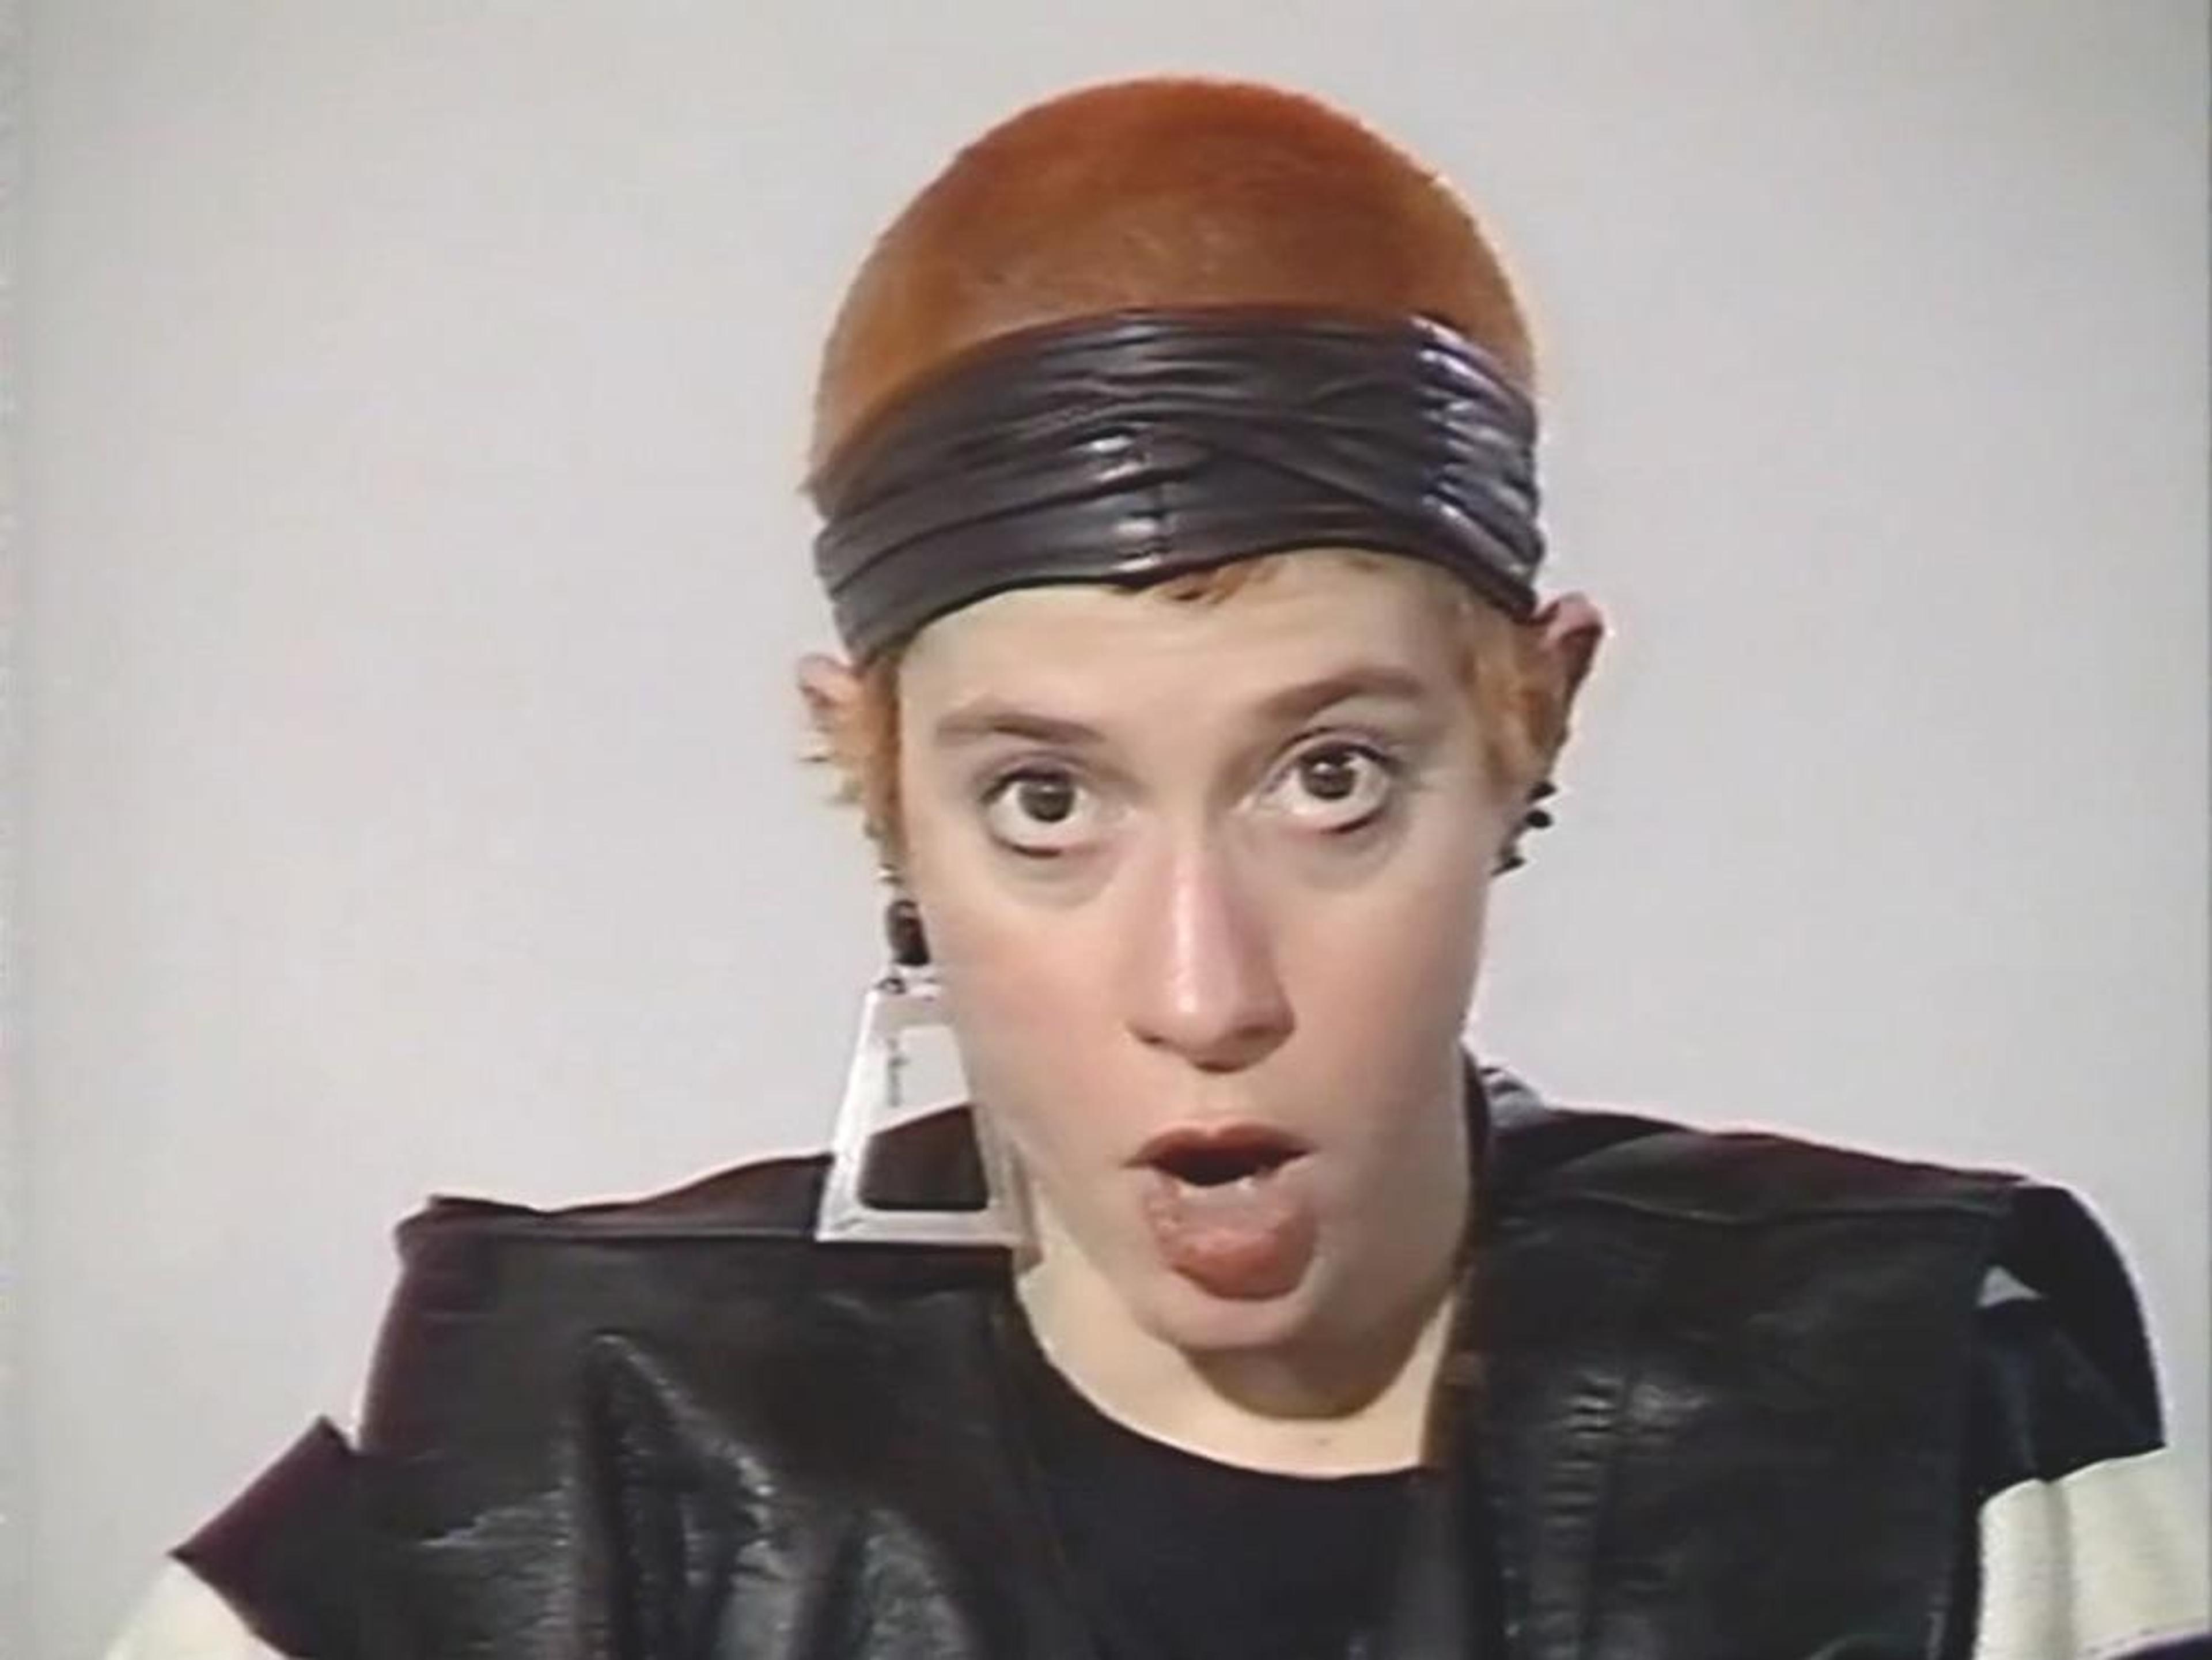 Kathy Acker in conversation with Angela McRobbie at the Institute of Contemporary Arts, London 1987